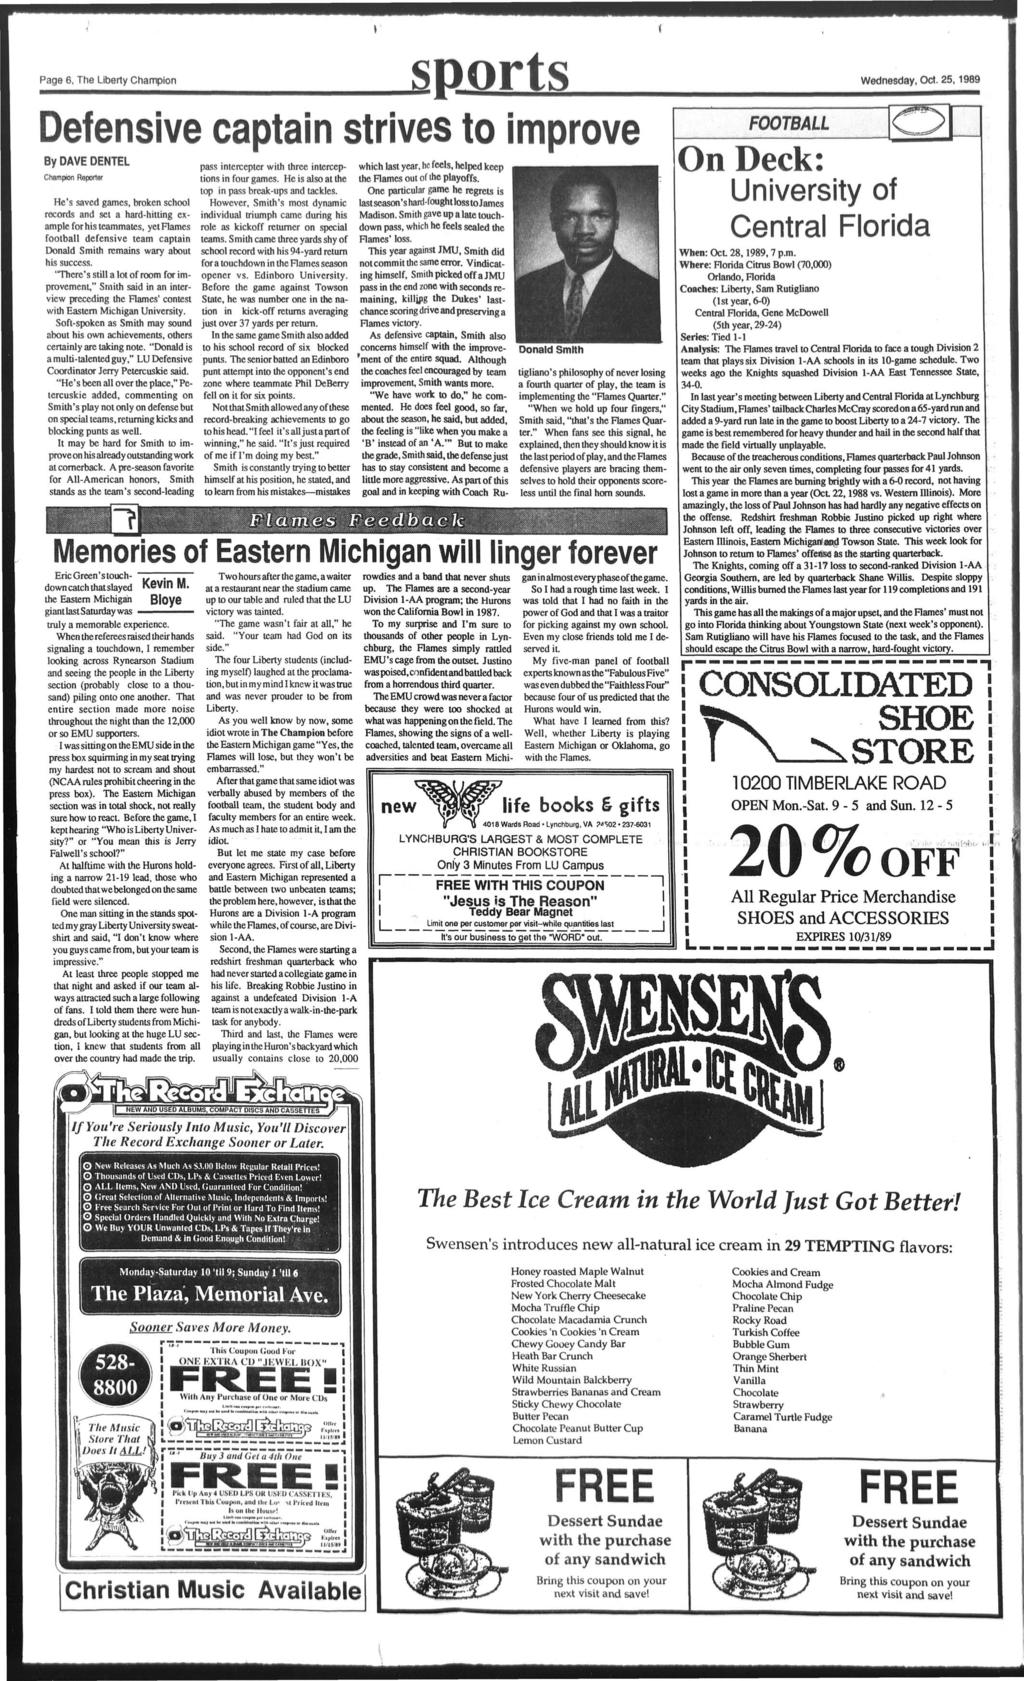 Page 6, The Lberty Champon sports \ Wednesday, Defensve captan strves to mprove By DAVE DENTEL Champon Reporter He's saved games, broken school records and set a hard-httng example for hs teammates,